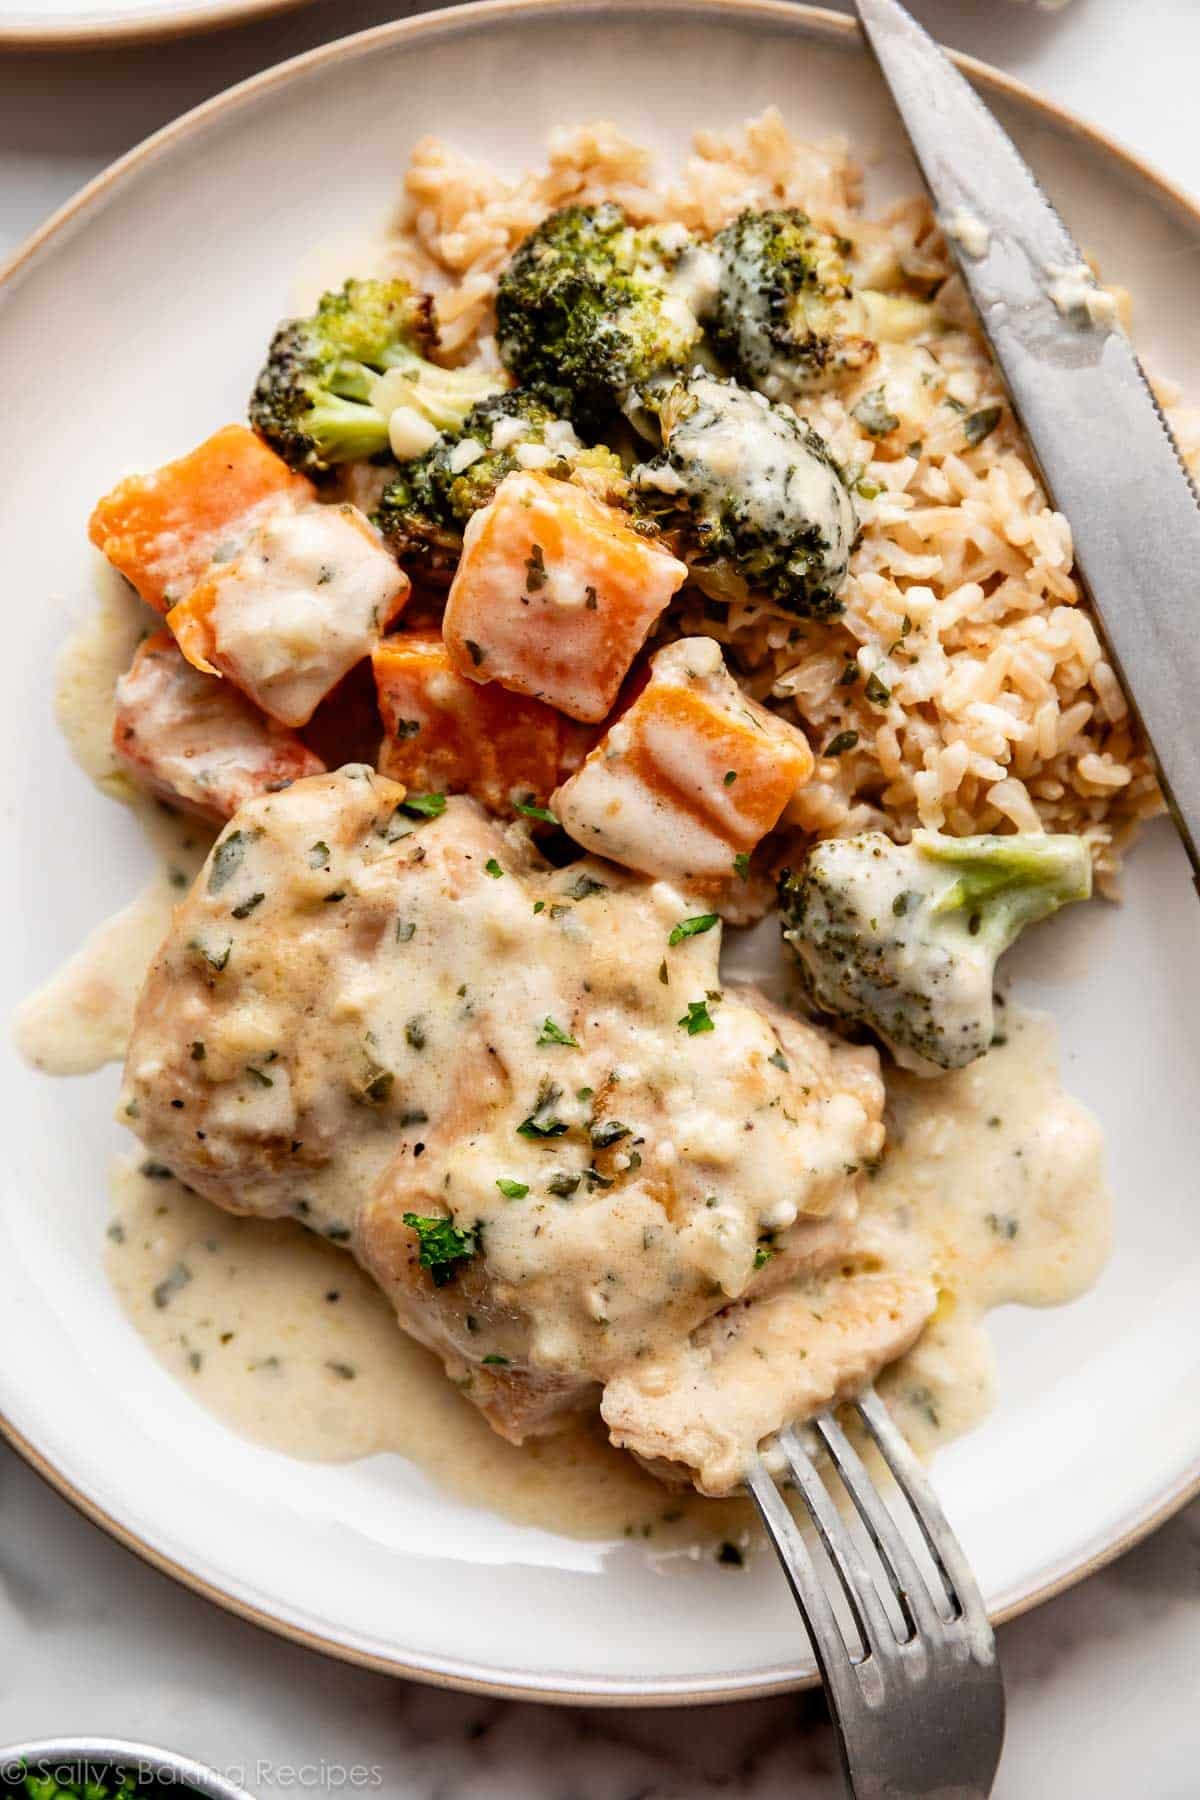 saucy and creamy garlic chicken with vegetables over brown rice on plate.